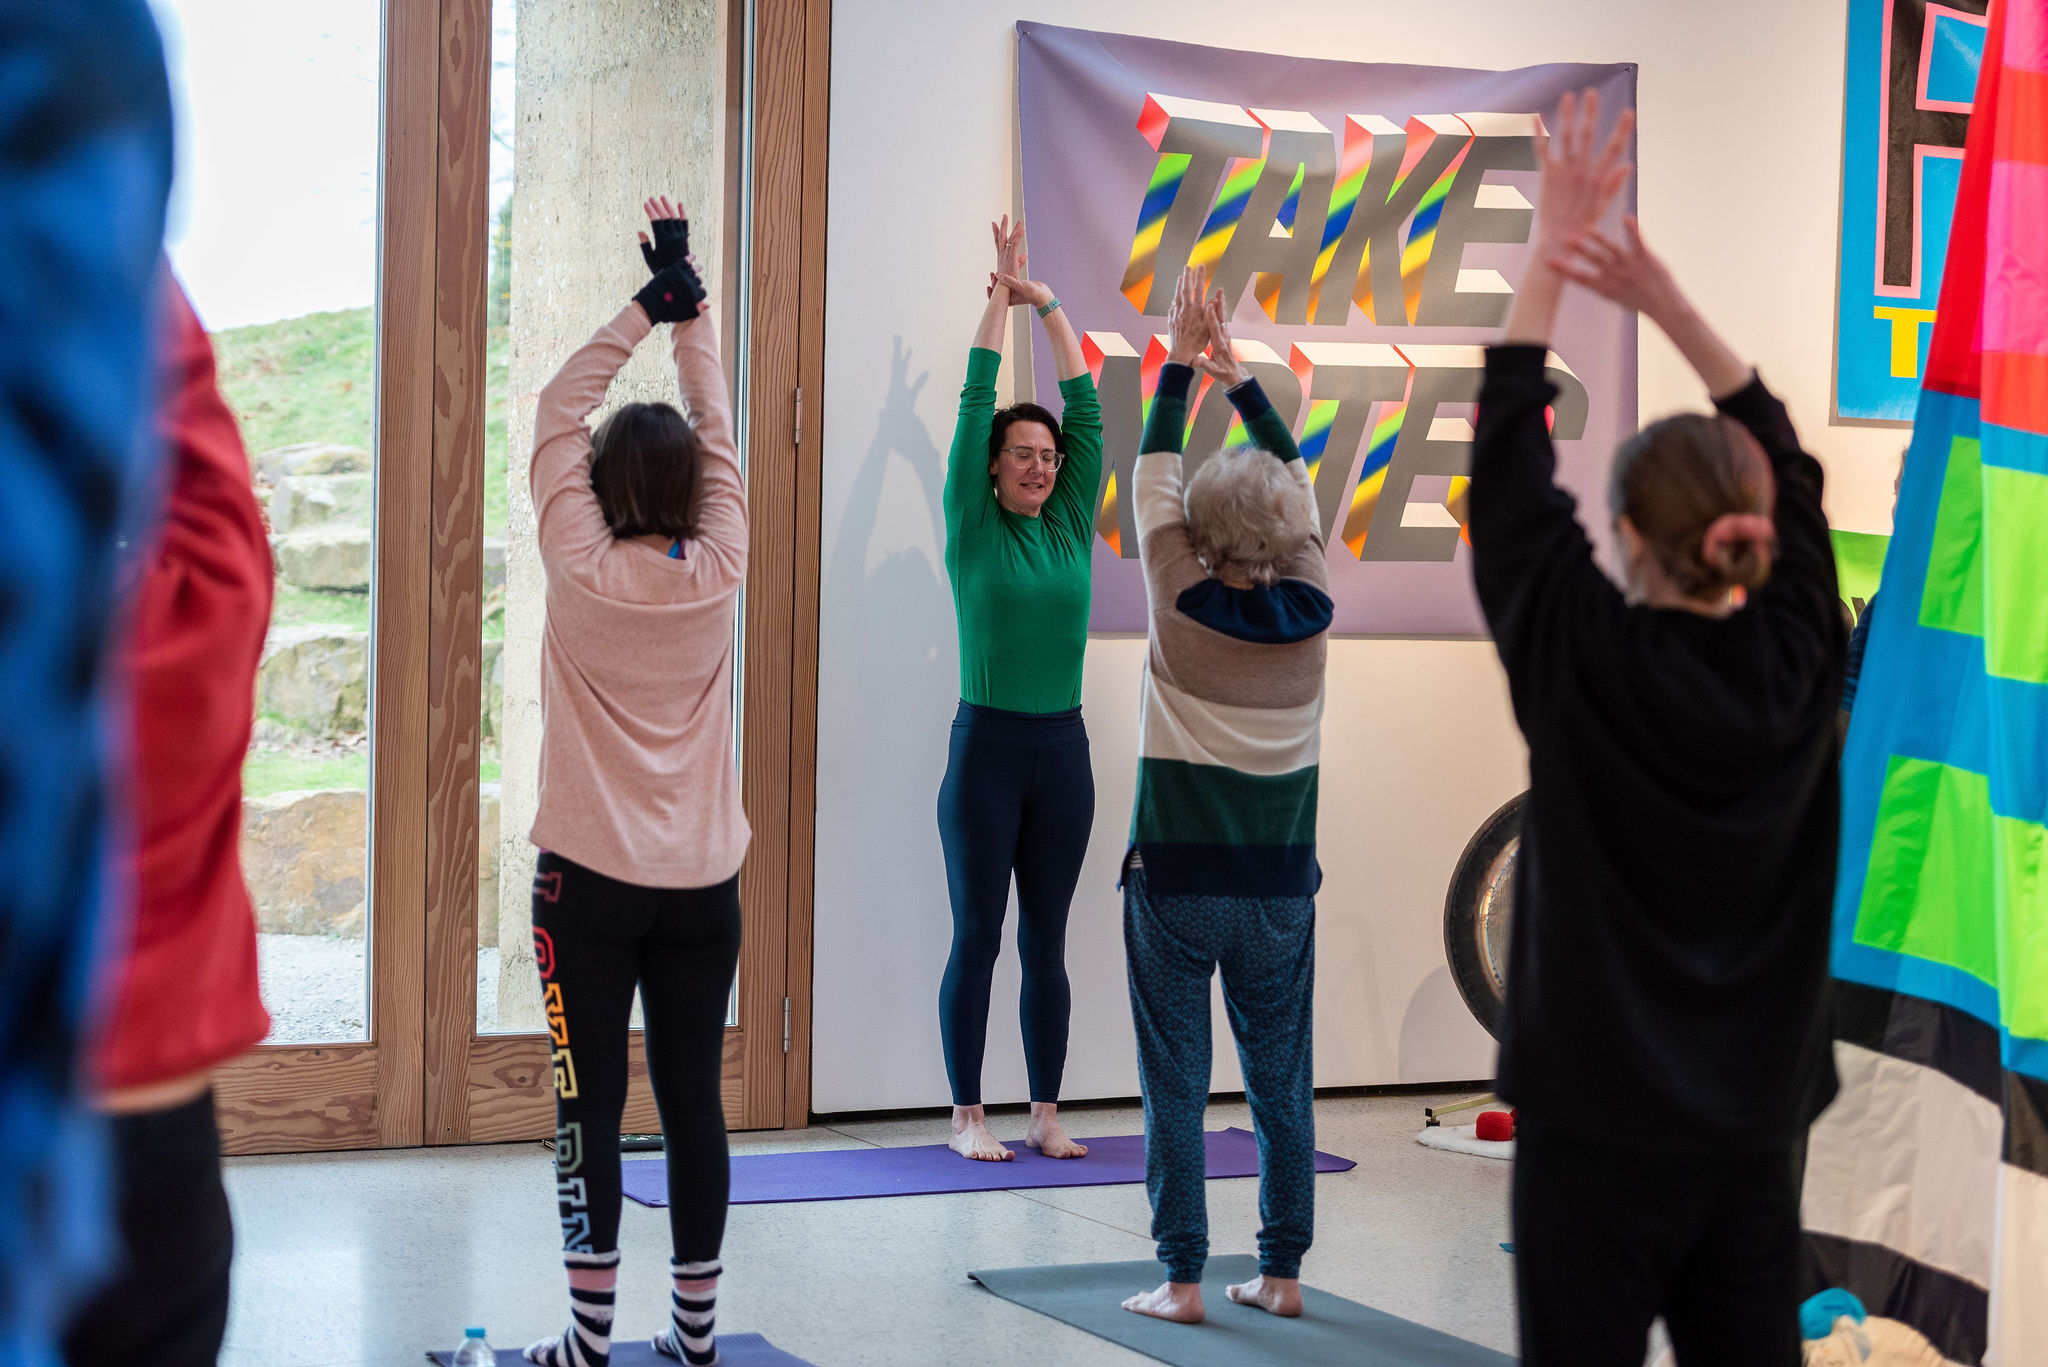 A group of people practicing yoga in a gallery space, surrounded by colourful fabric hangings.